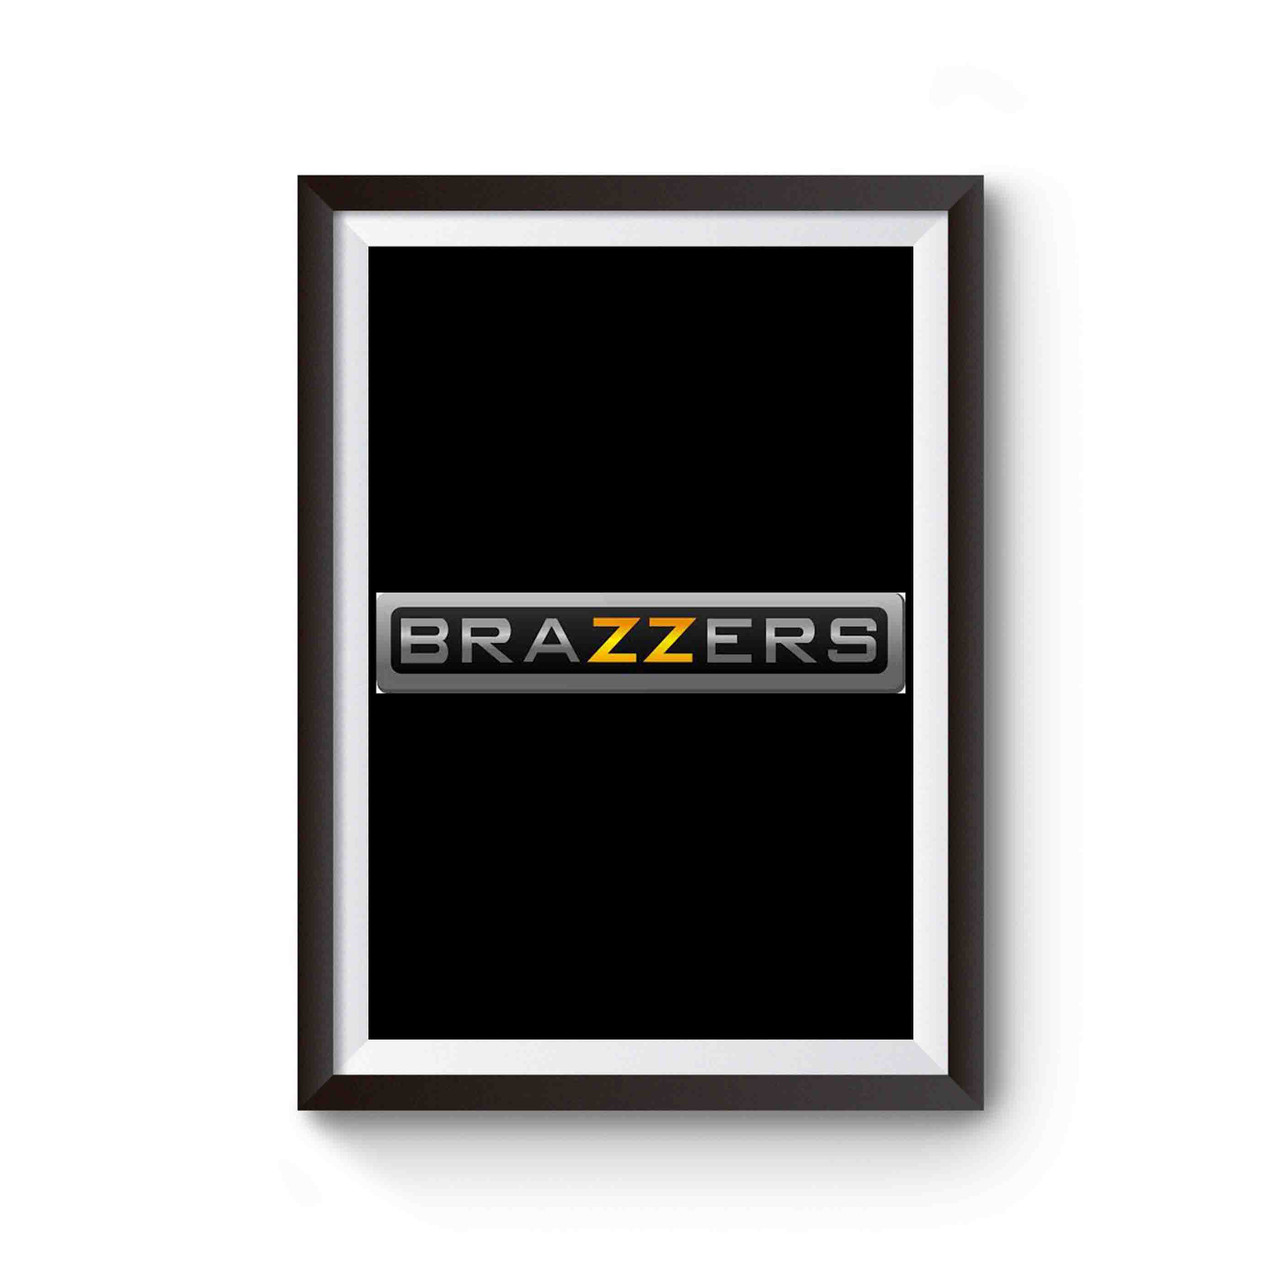 Baszzers - Brazzers Funny Cool Porn Industry Poster